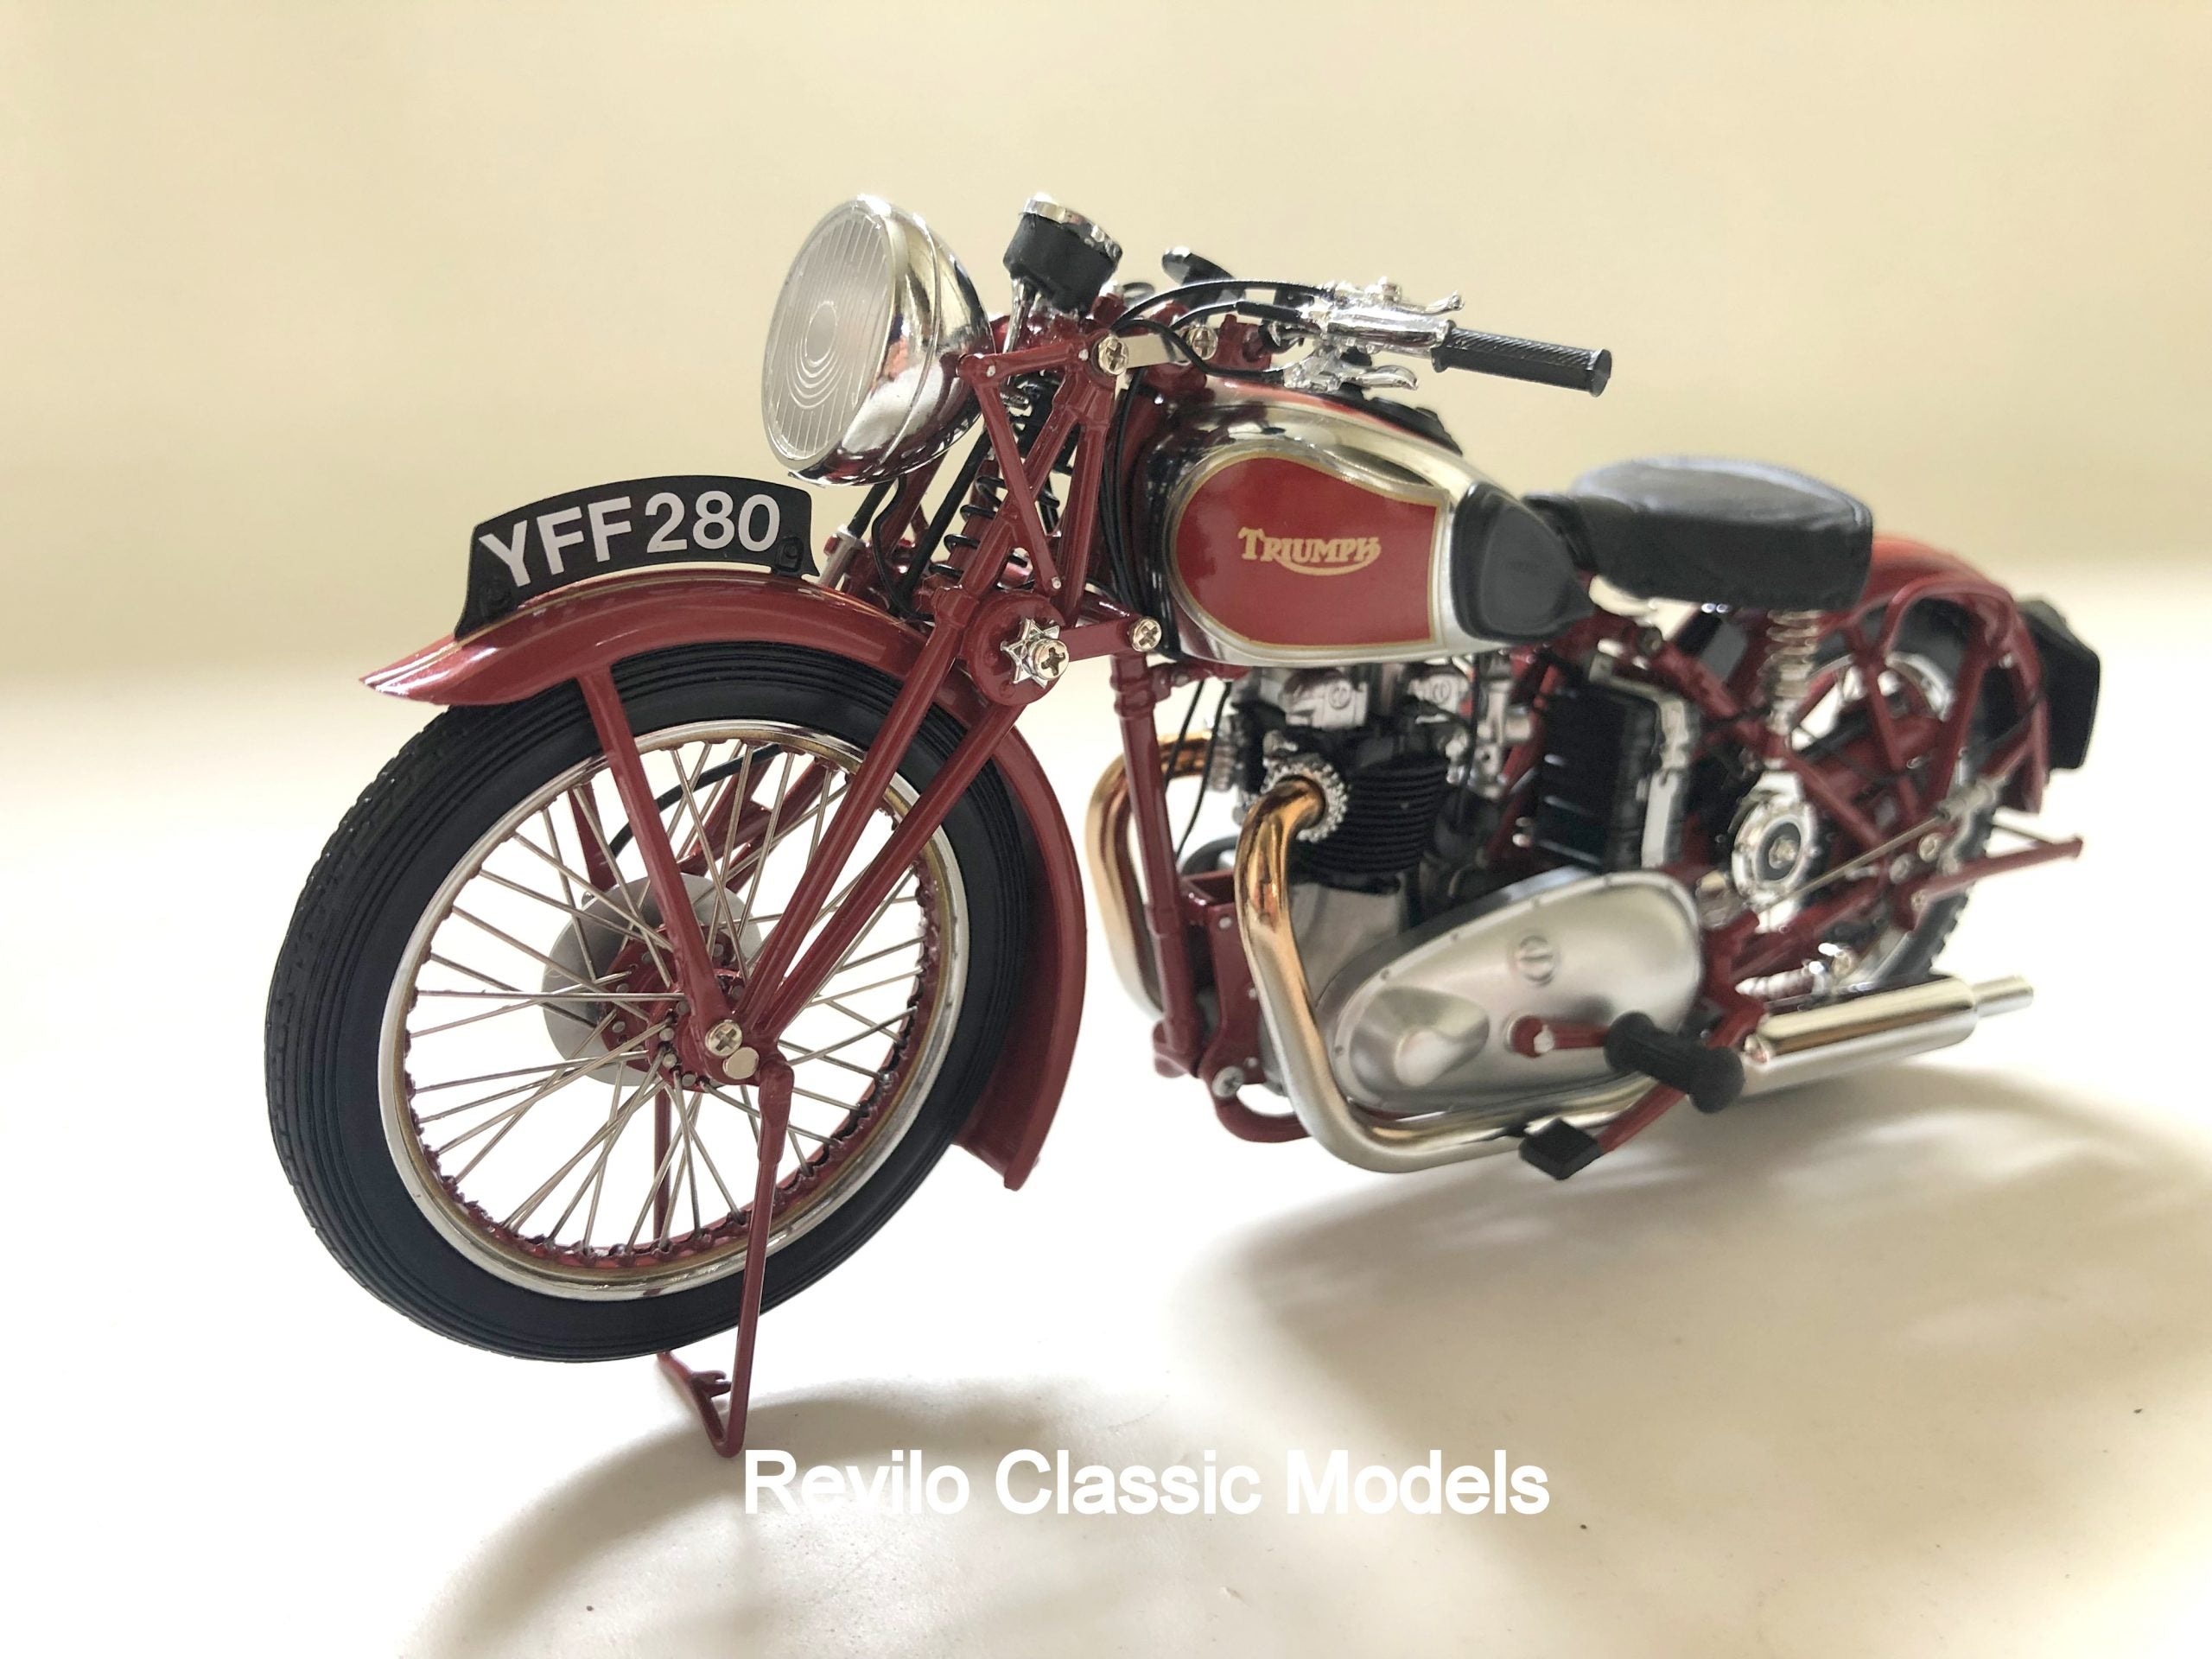 1:12 scale Triumph Speed Twin by Minichamps